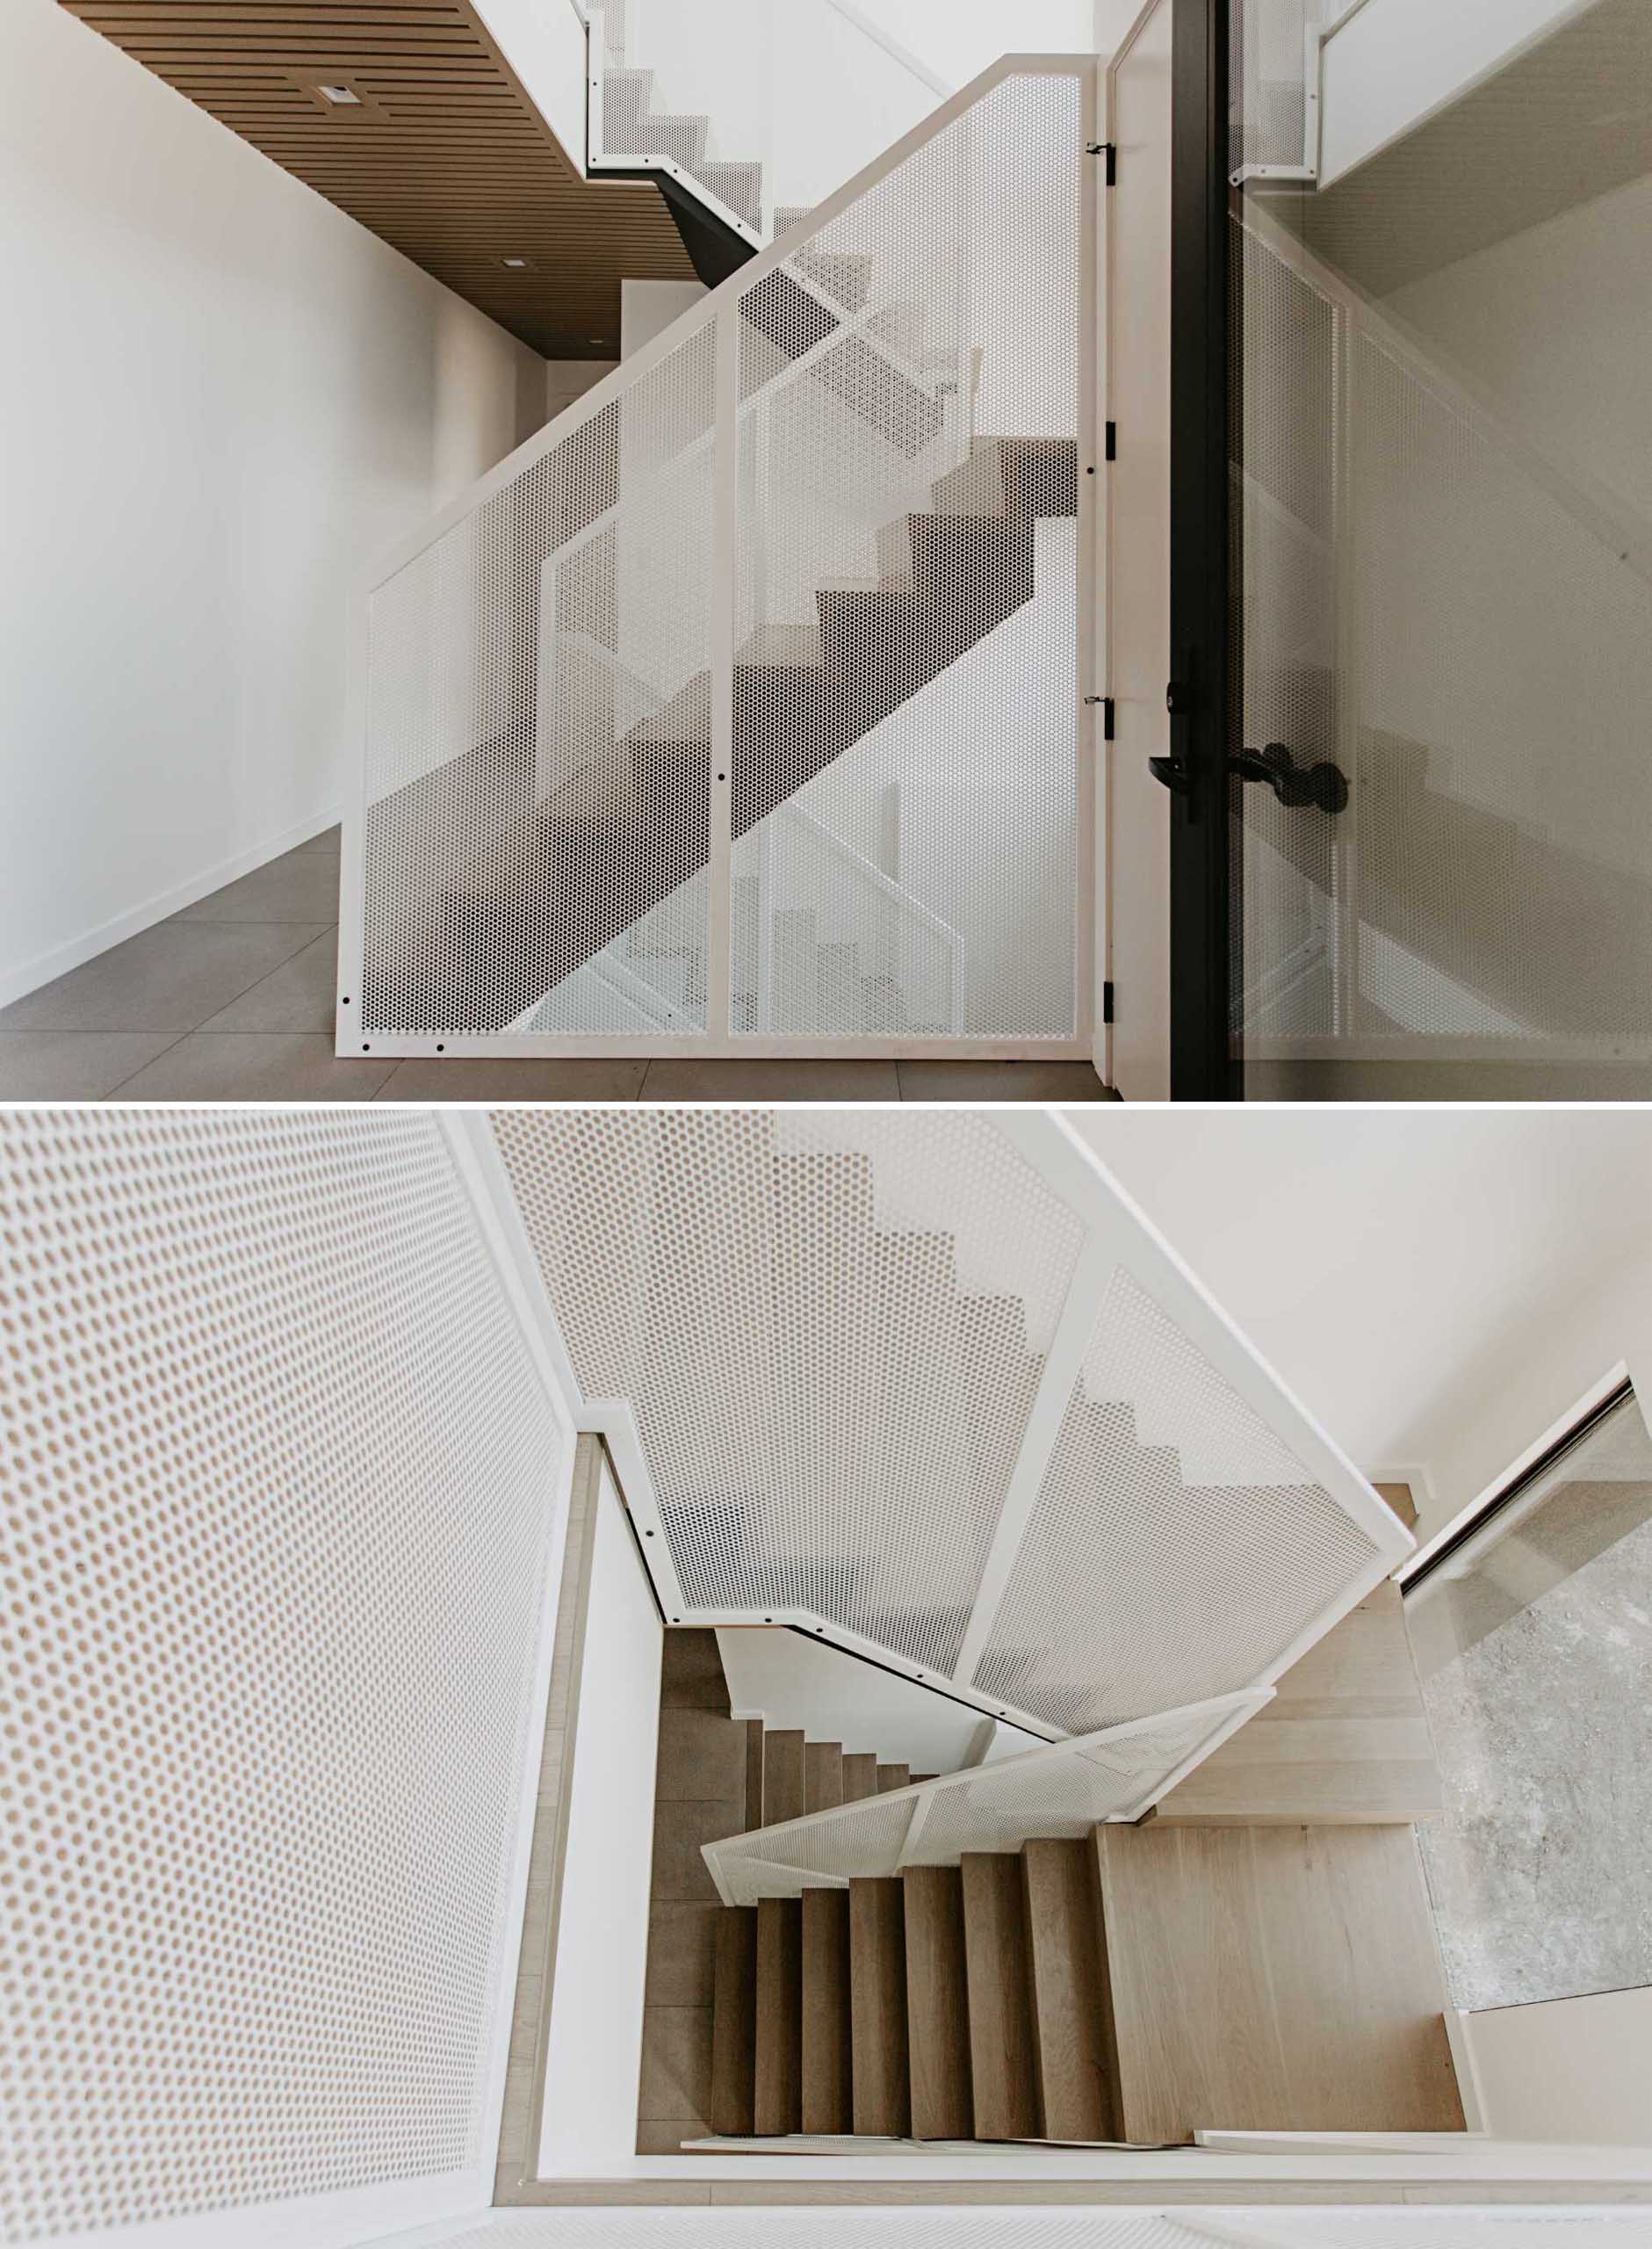 Modern wood stairs with perforated metal panels.